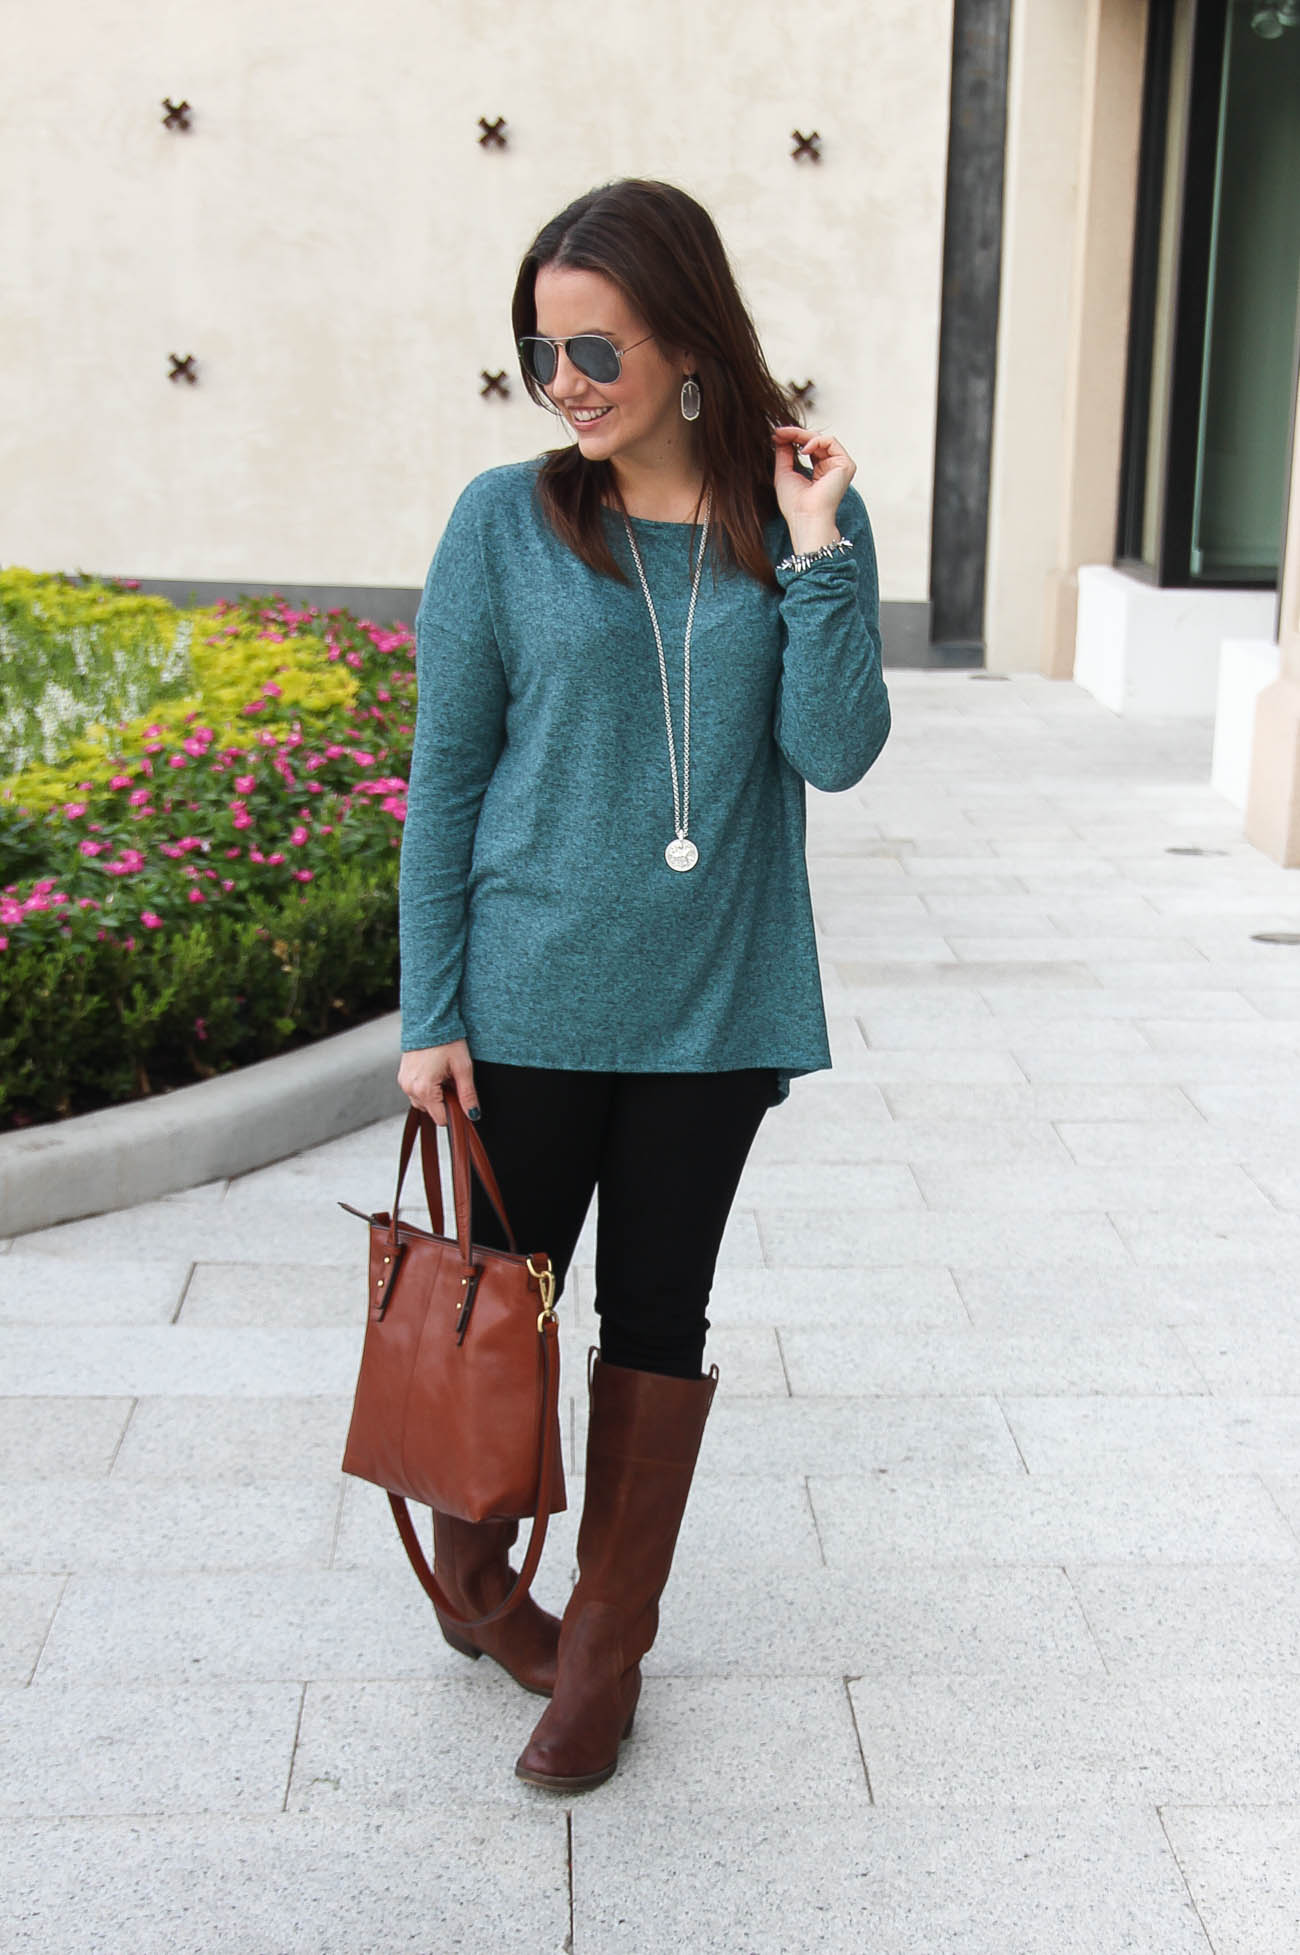 Teal Sweater + Brown Riding Boots - Lady in VioletLady in Violet